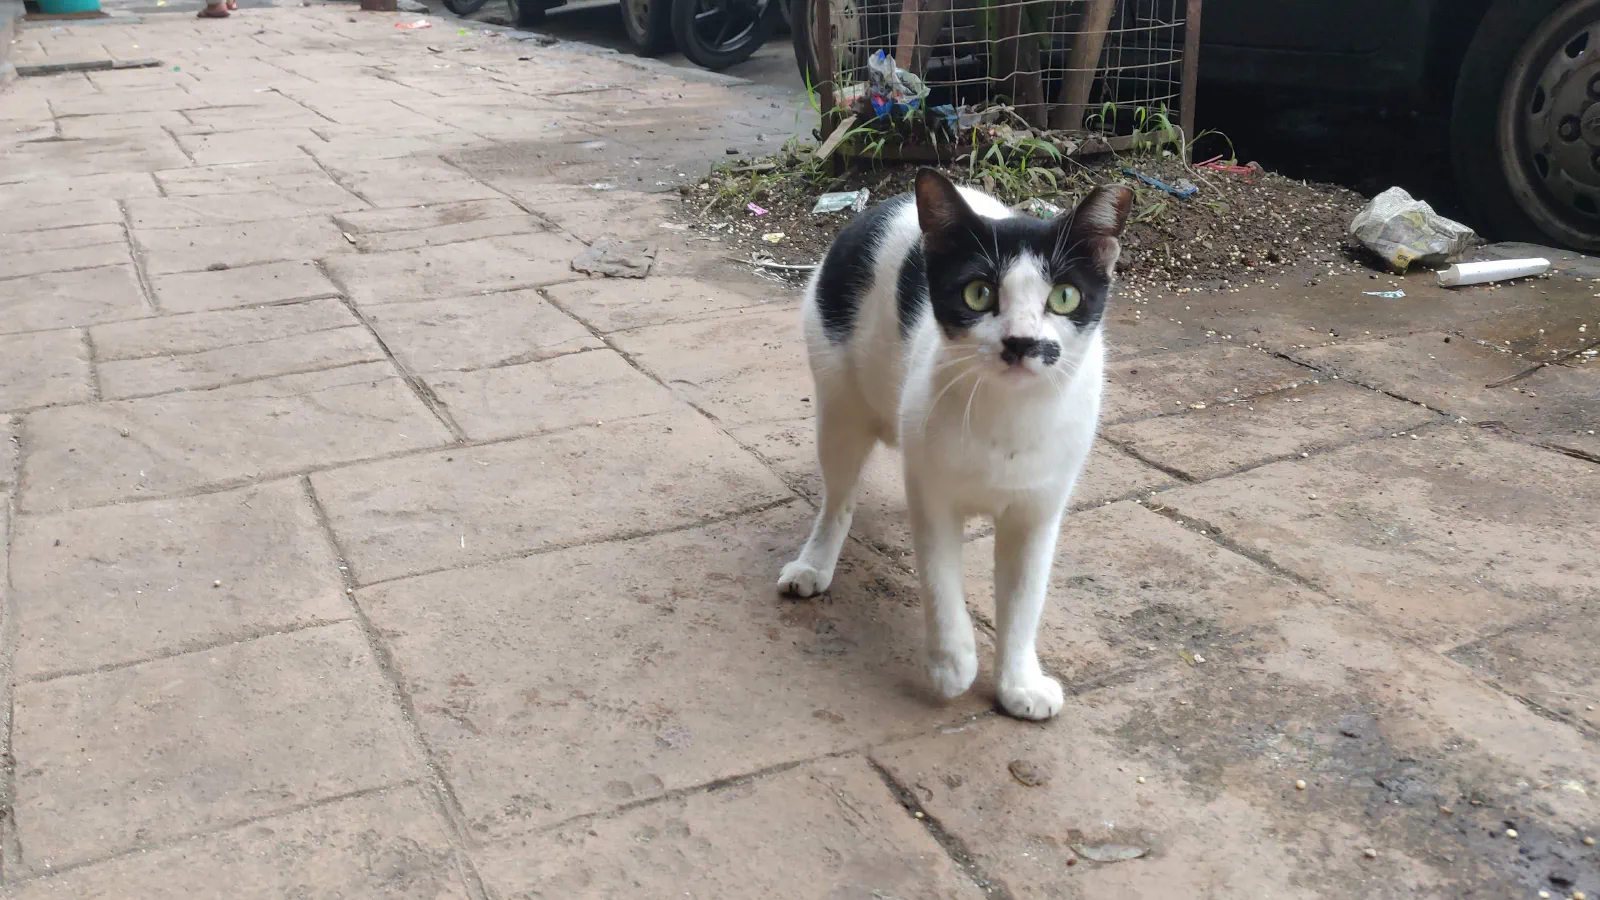 A black and white cat with markings that look like a mustache.